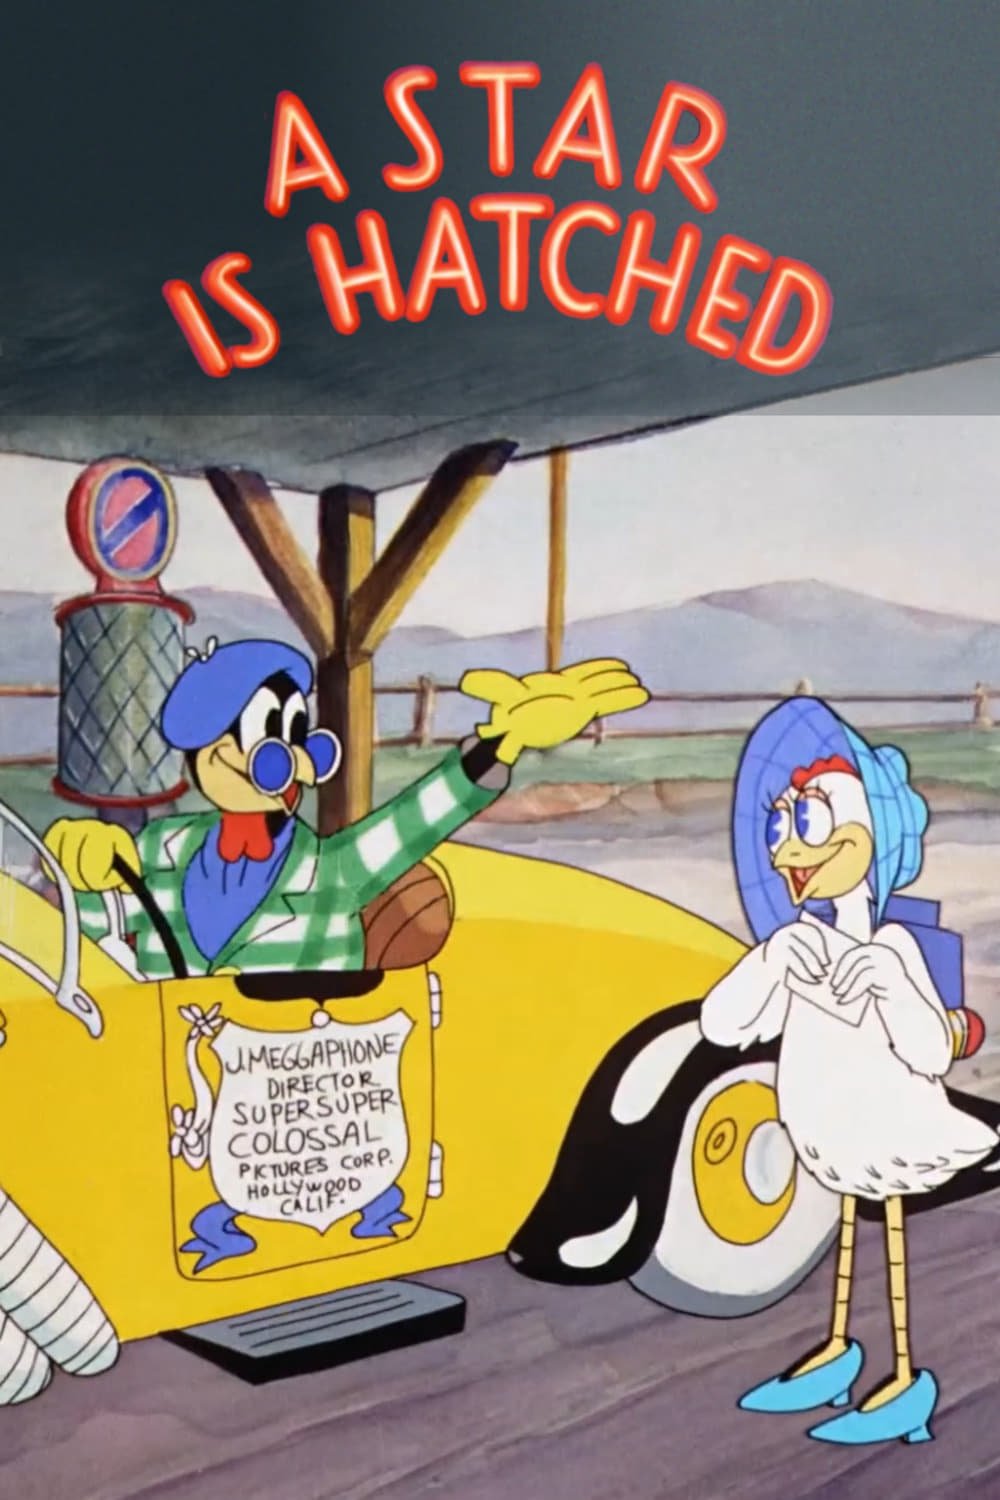 A Star Is Hatched (1938)